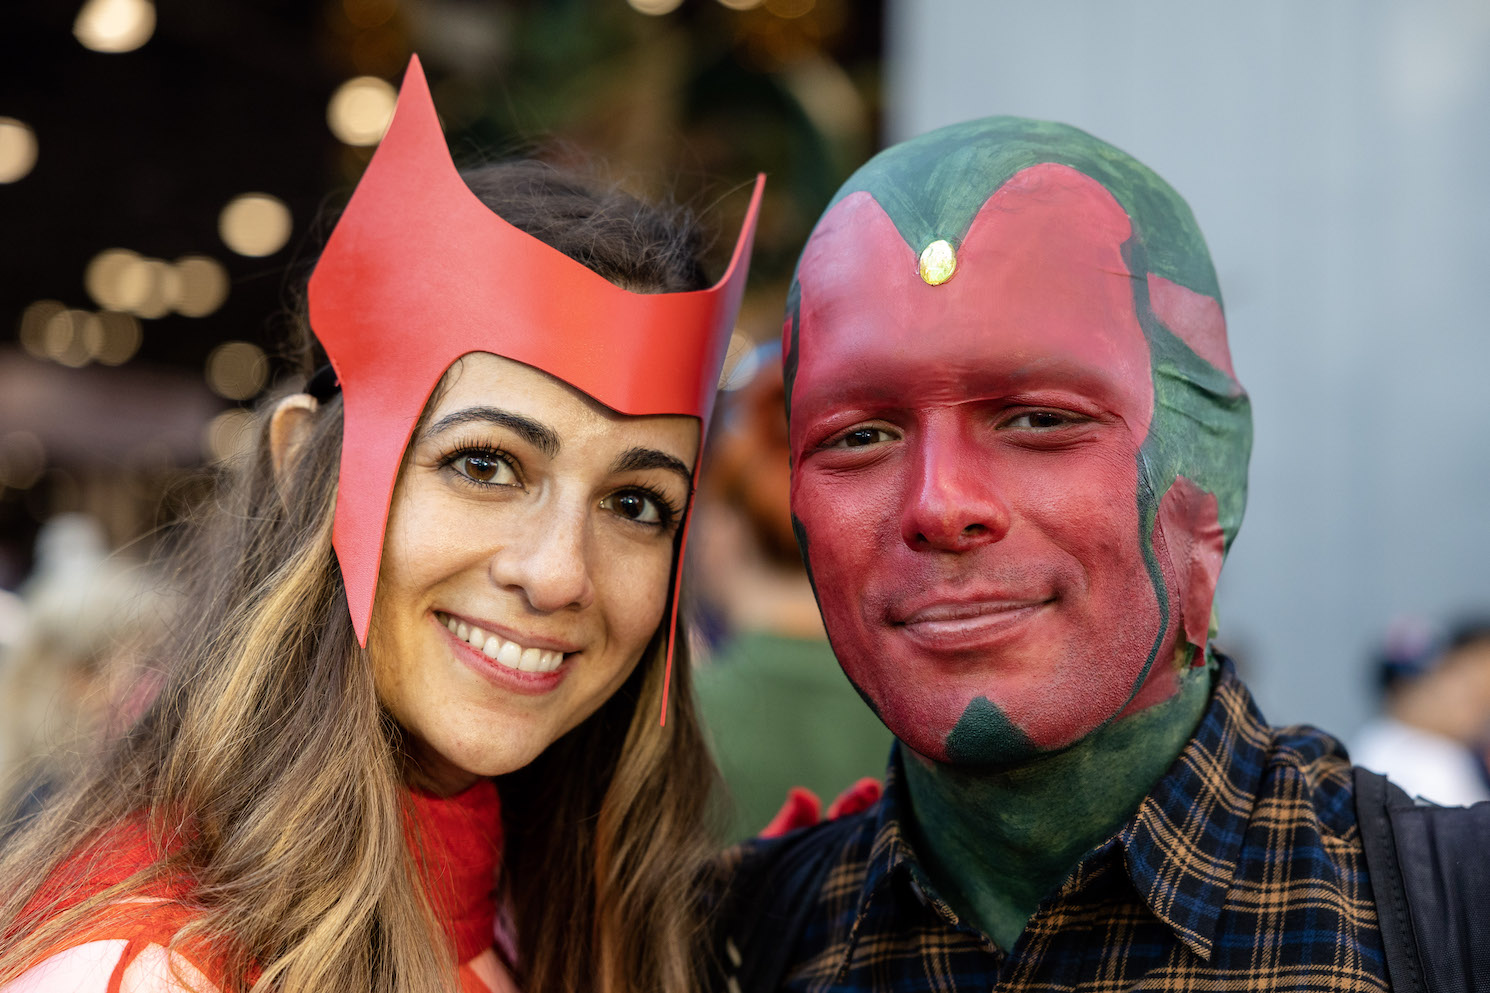 : A couple dressed as the Marvel character “Wanda” and “Vision.” On the left, a woman wears a red crown and matching red turtlenecked suit. On the right, a man with a red-and-green painted face and a yellow gemstone on his forehead wears a flannel shirt.